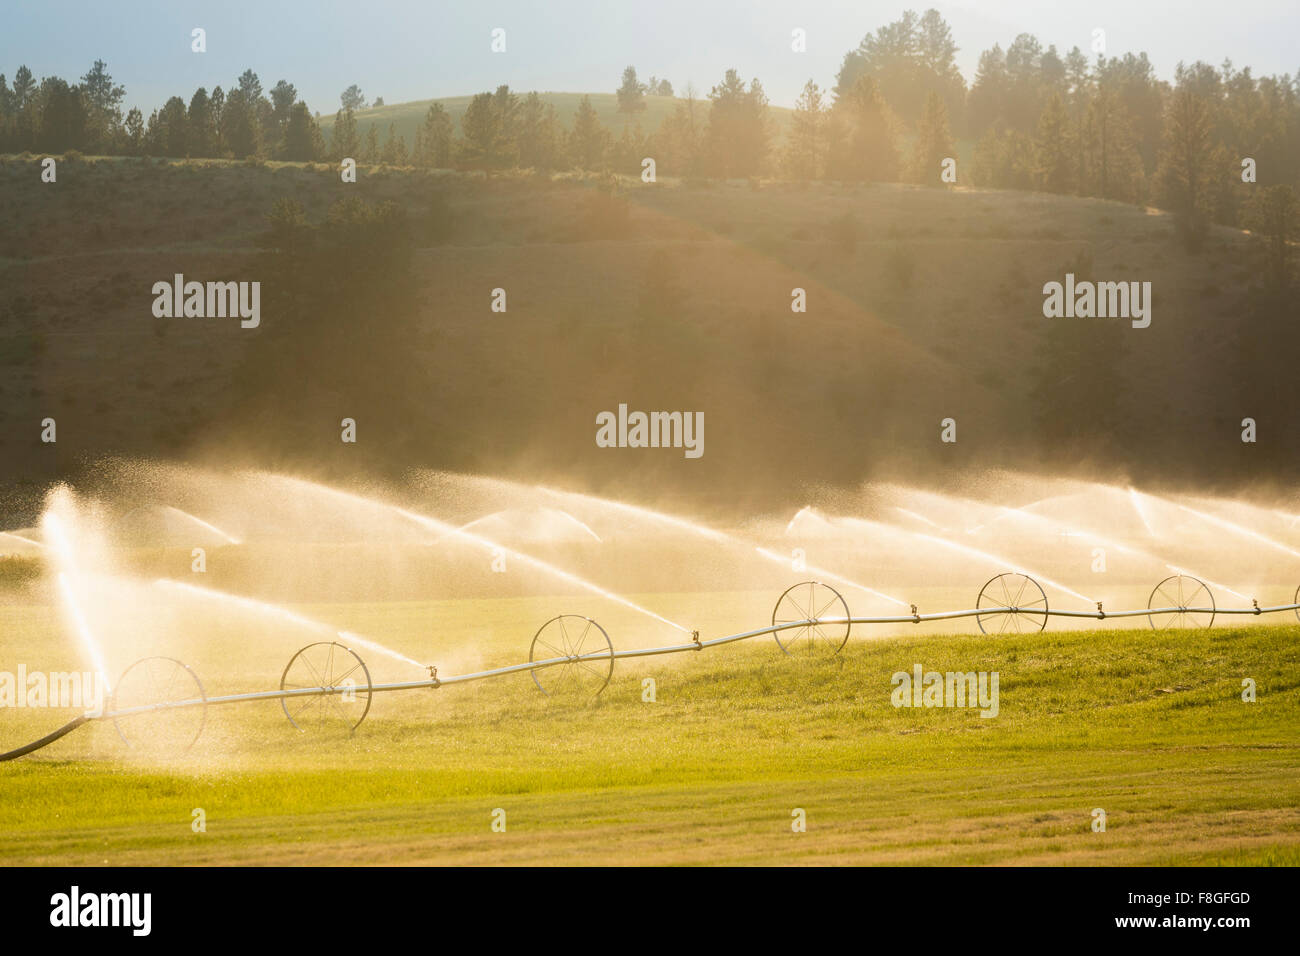 Irrigation system watering crops in farm field Stock Photo